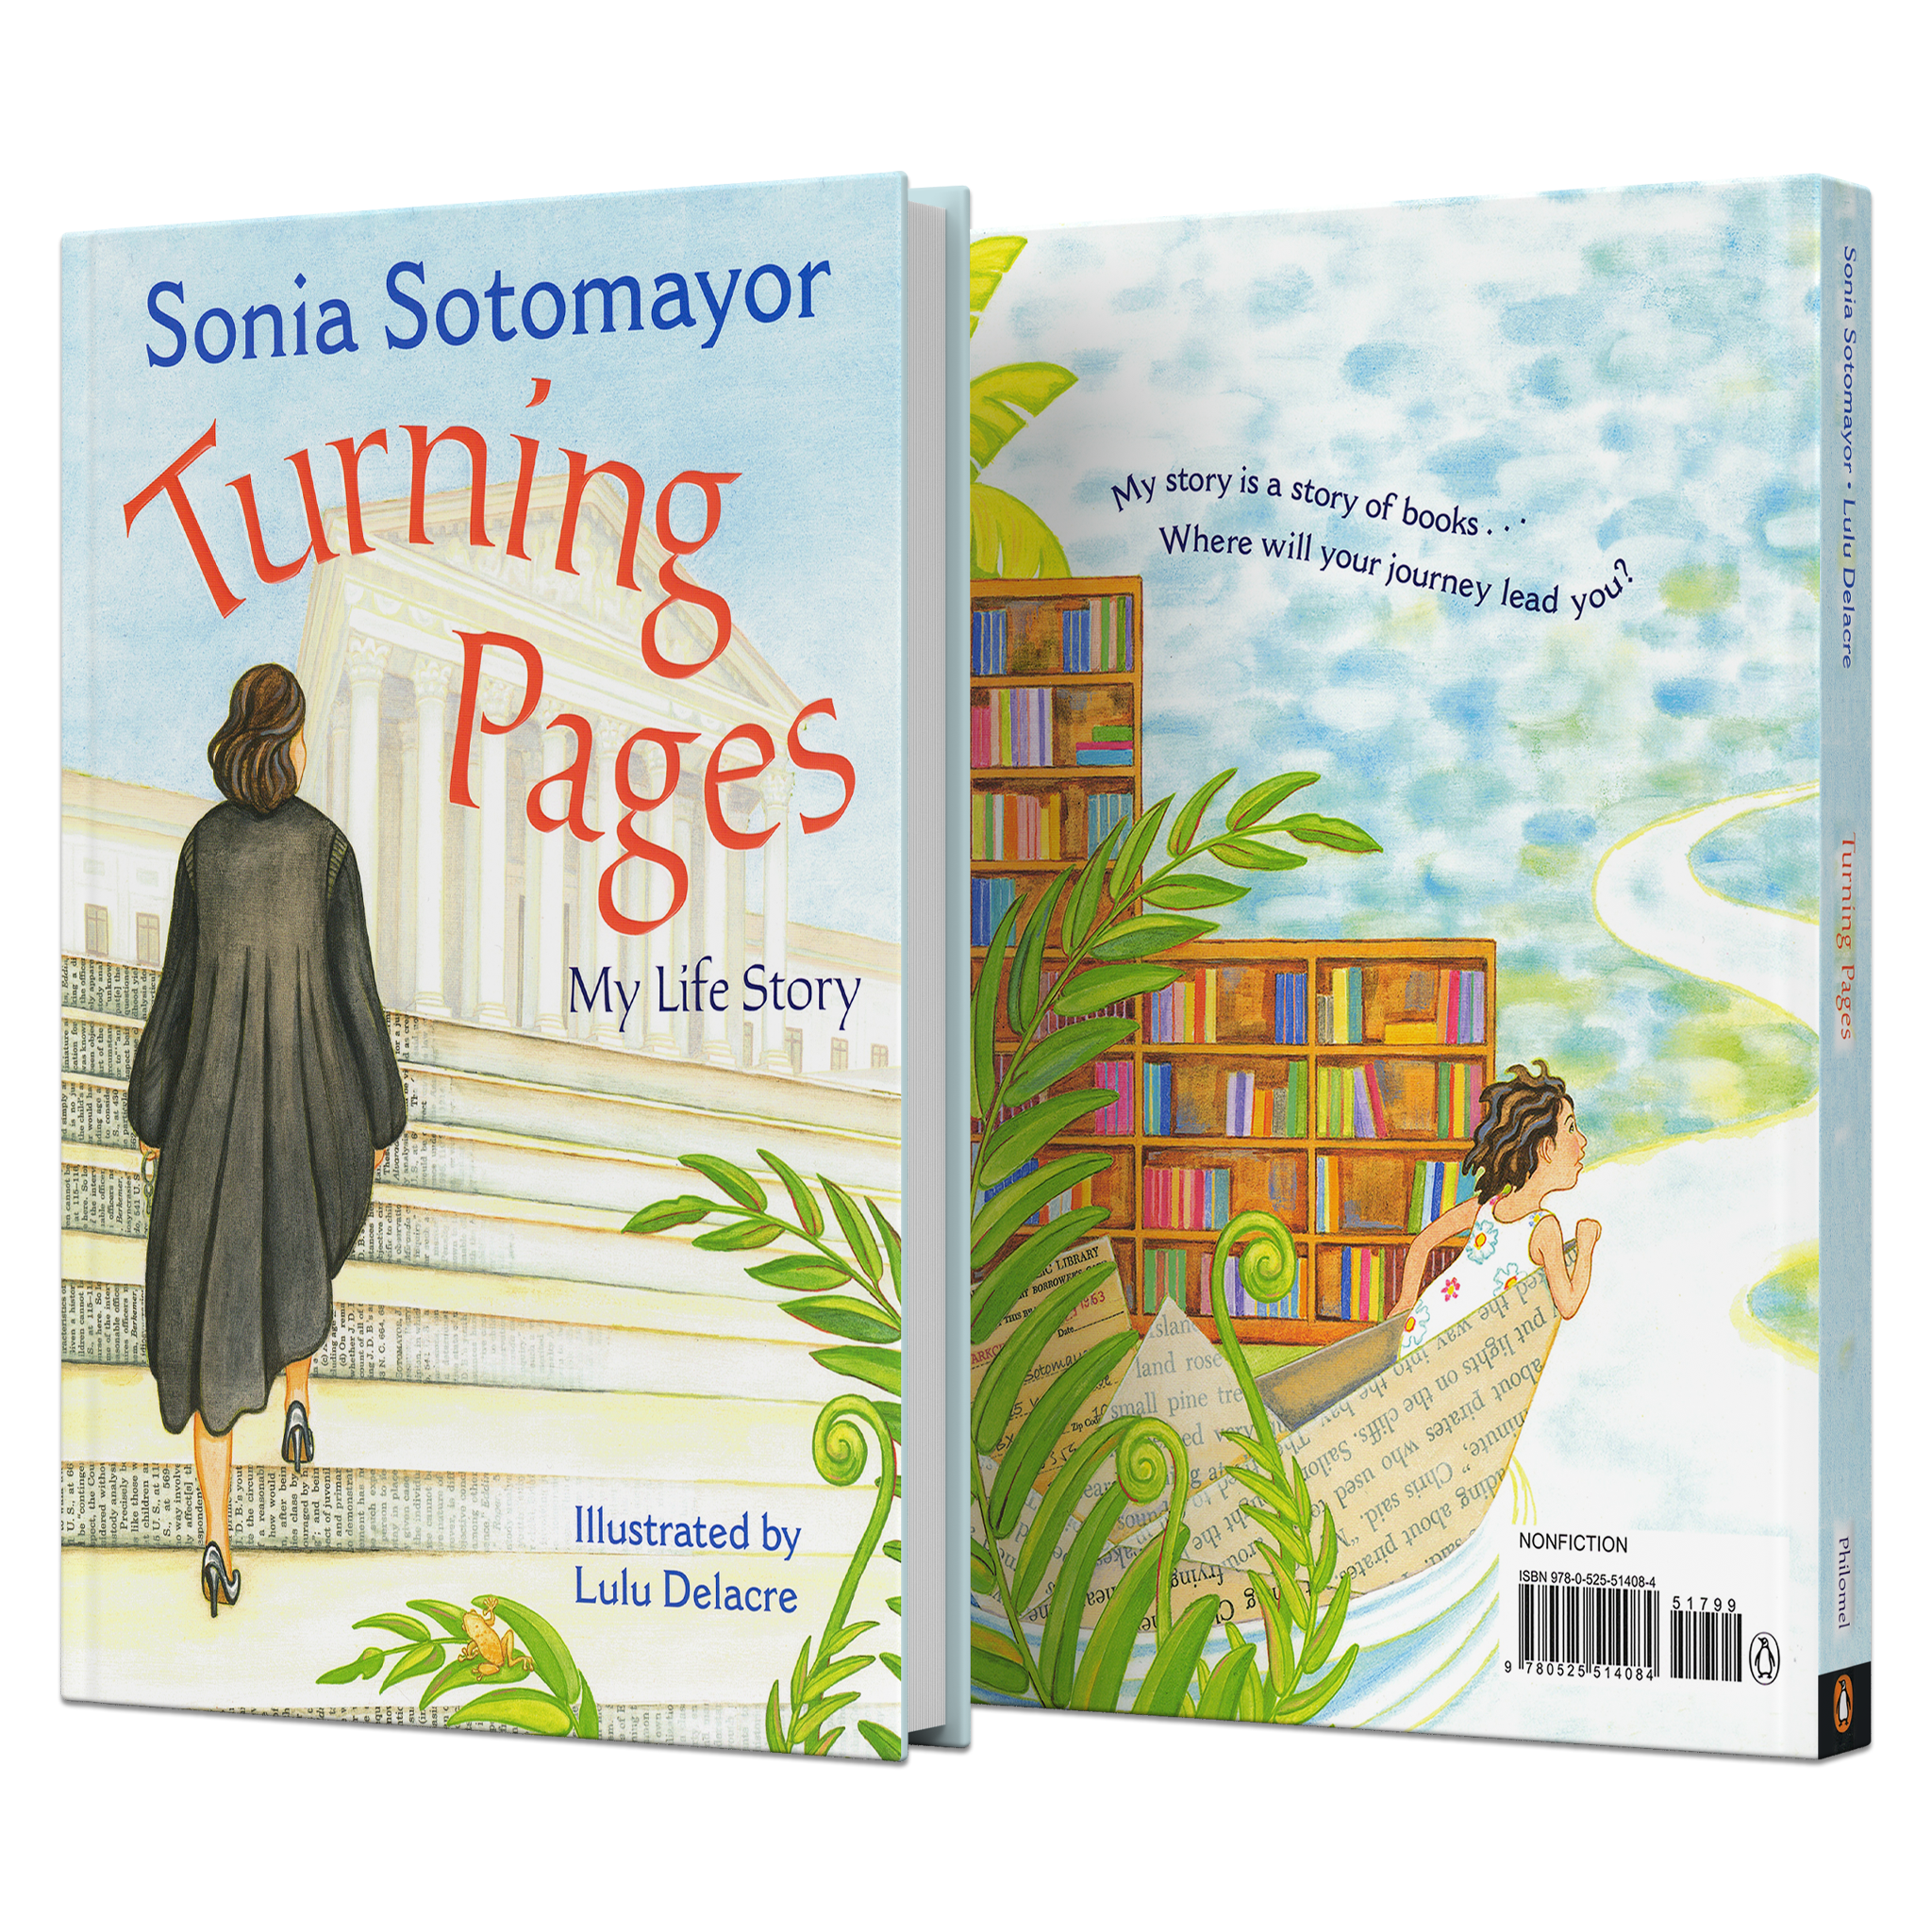 Turning Pages: My Life Story by Sonia Sotomayor Front and Back